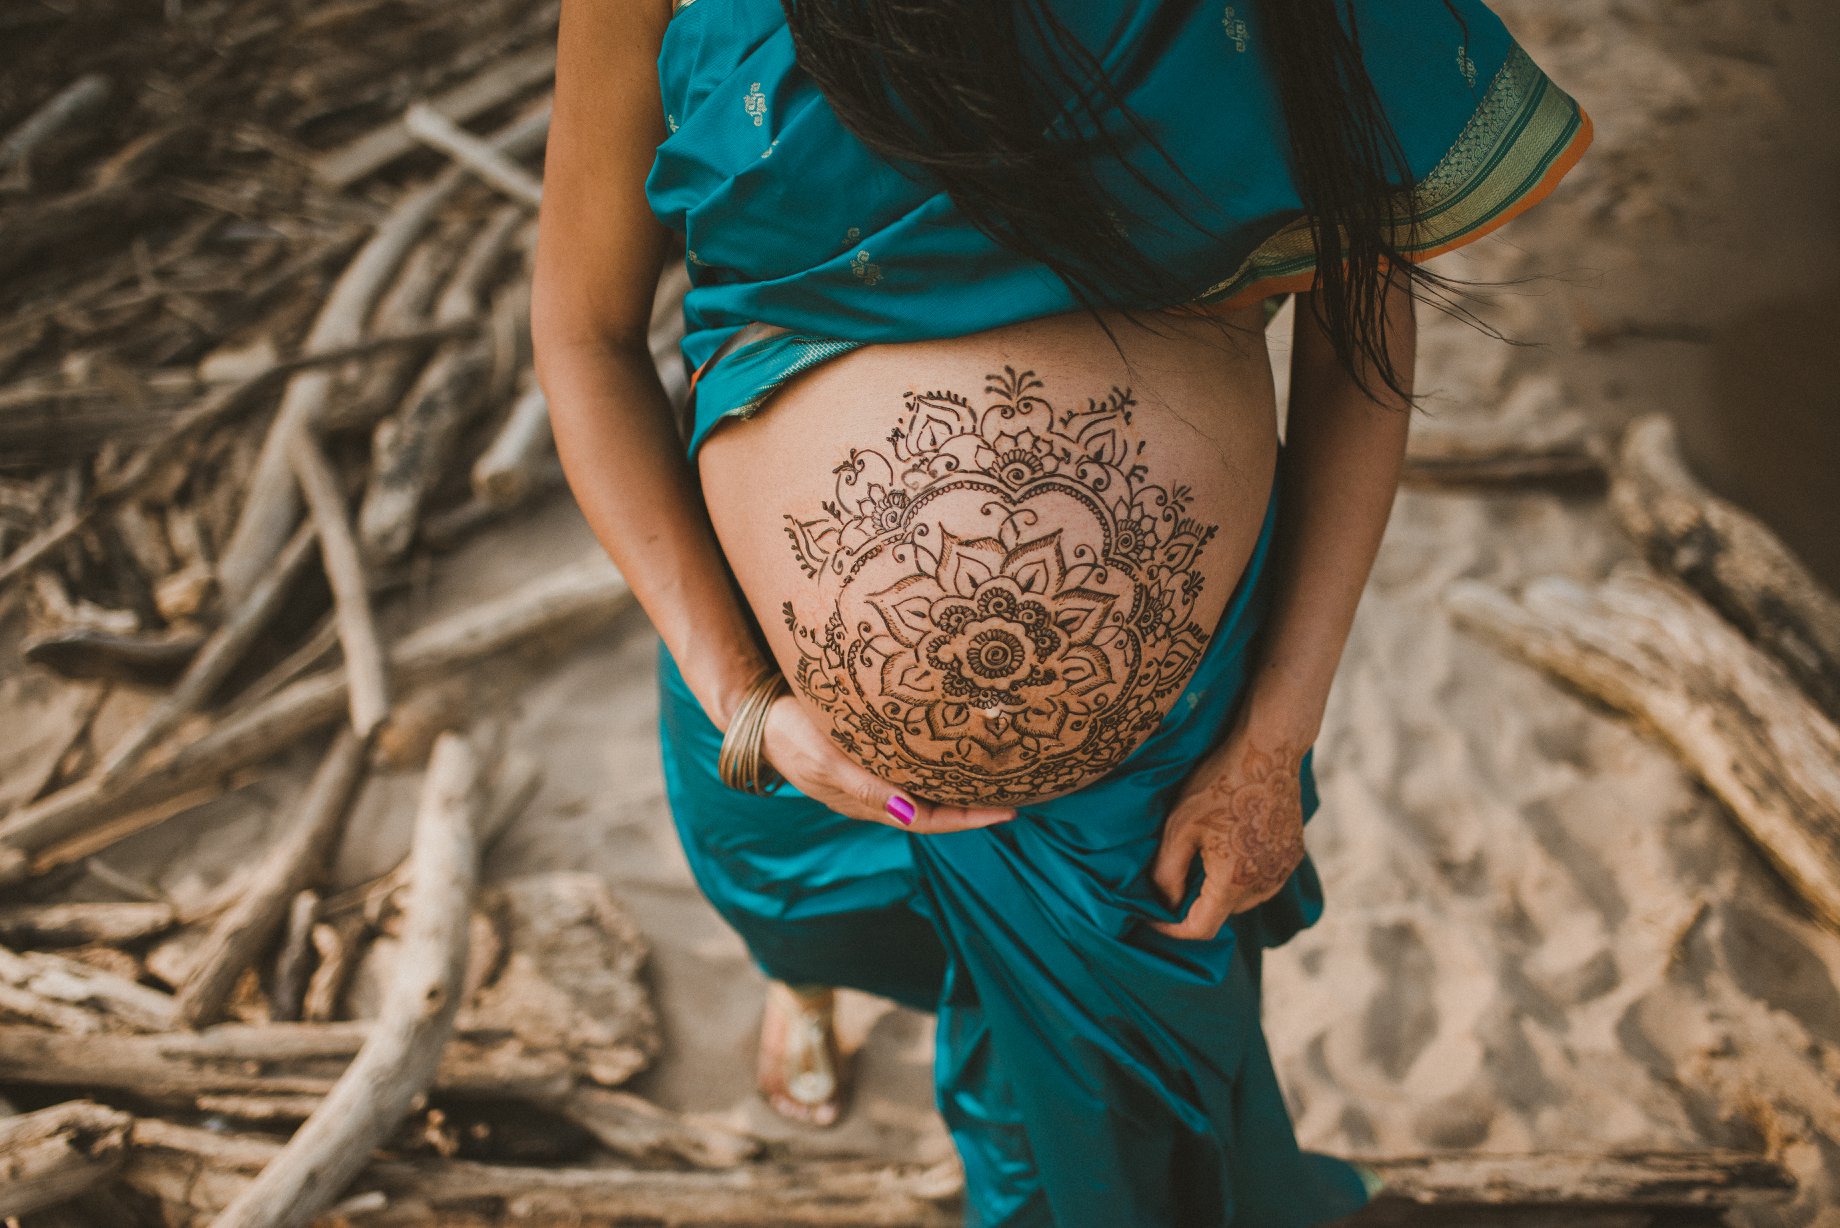 Maternity Features | Emotional Storytelling with Twyla Jones